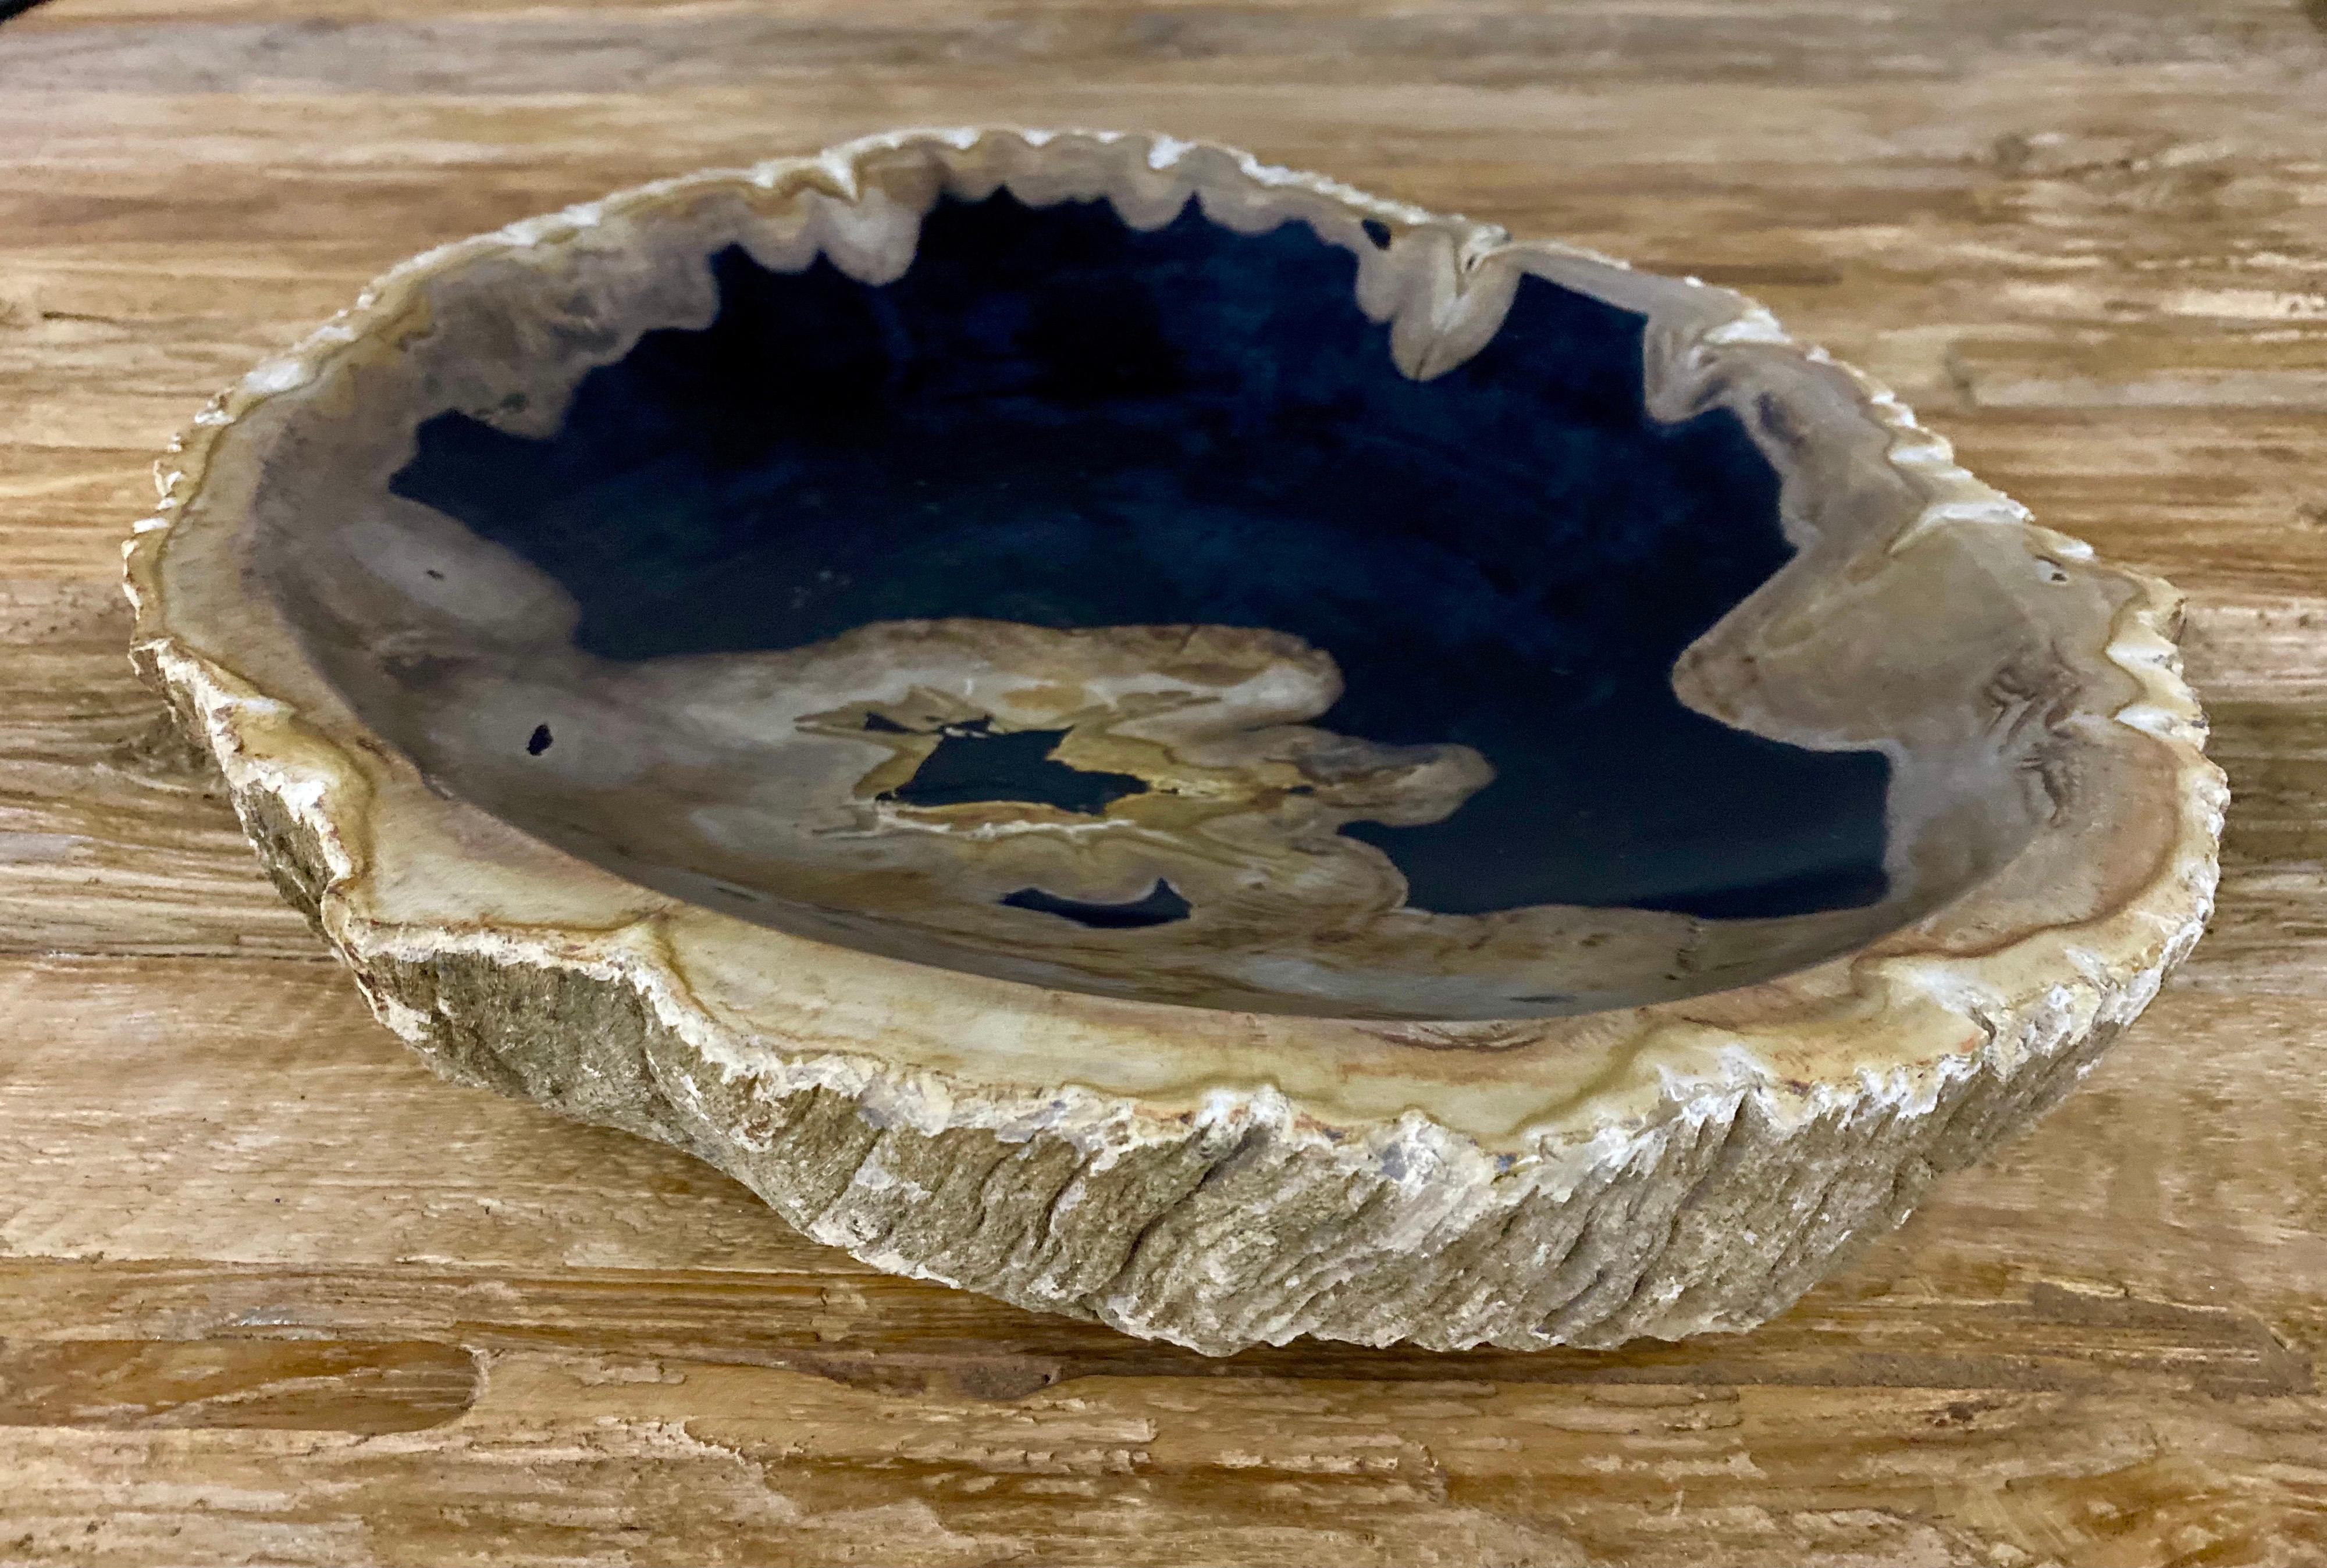 Polished Petrified Wood Bowl in Beige/ Grey/ Black Tones - Top Quality